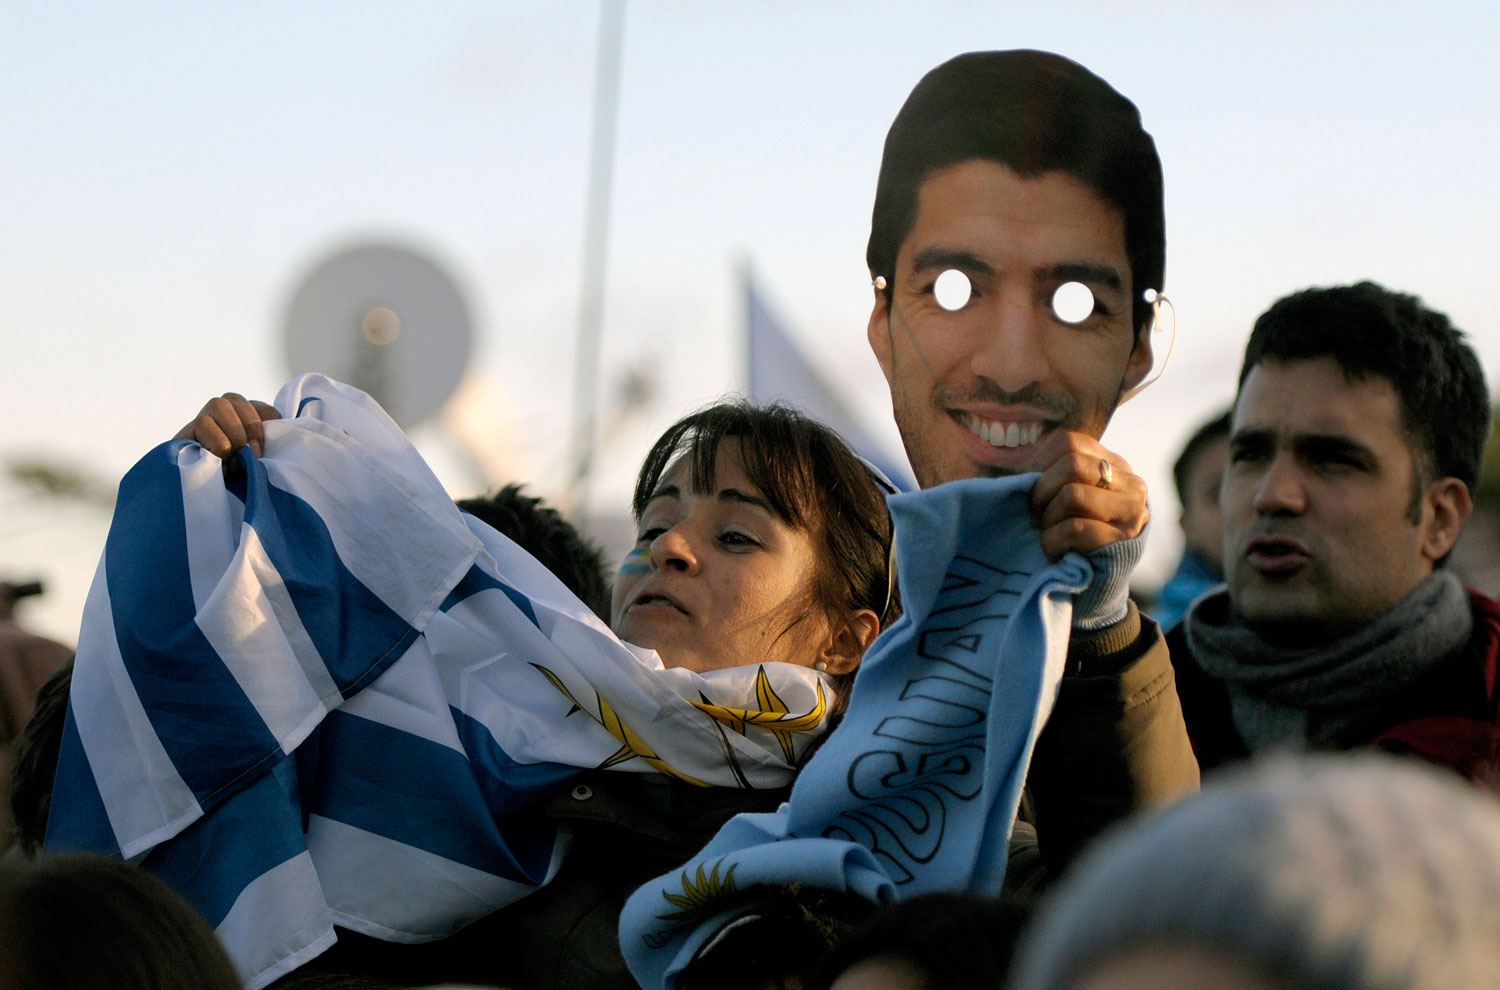 A Uruguay soccer fan holds an image of player Luis Suarez outside Suarez's home where people gather to watch the World Cup via a live telecast of the match between Uruguay and Colombia on the outskirts of Montevideo, Uruguay on June 28, 2014.